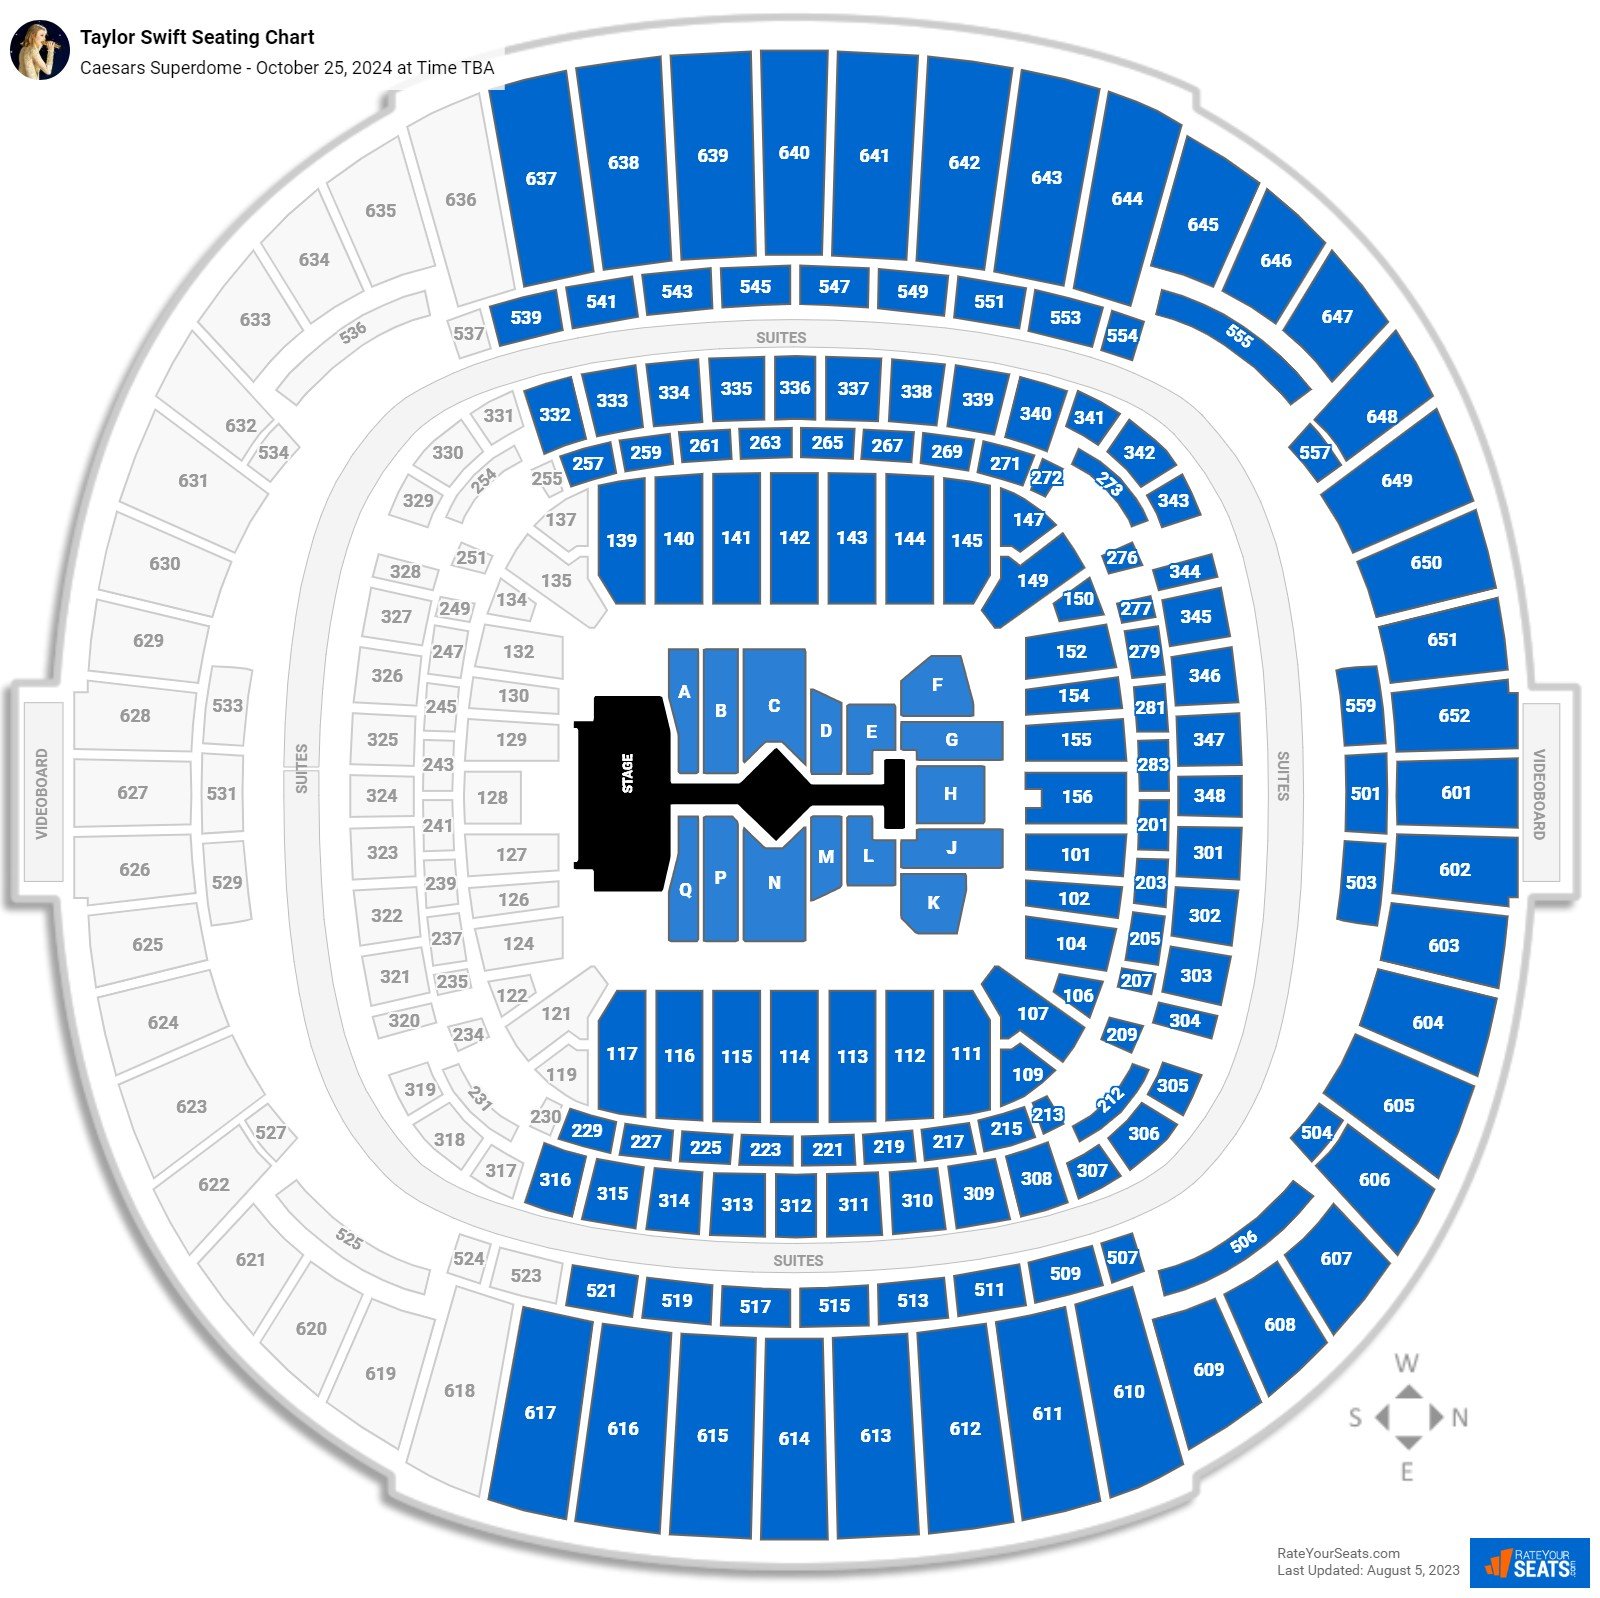 Caesars Superdome Concert Seating Chart